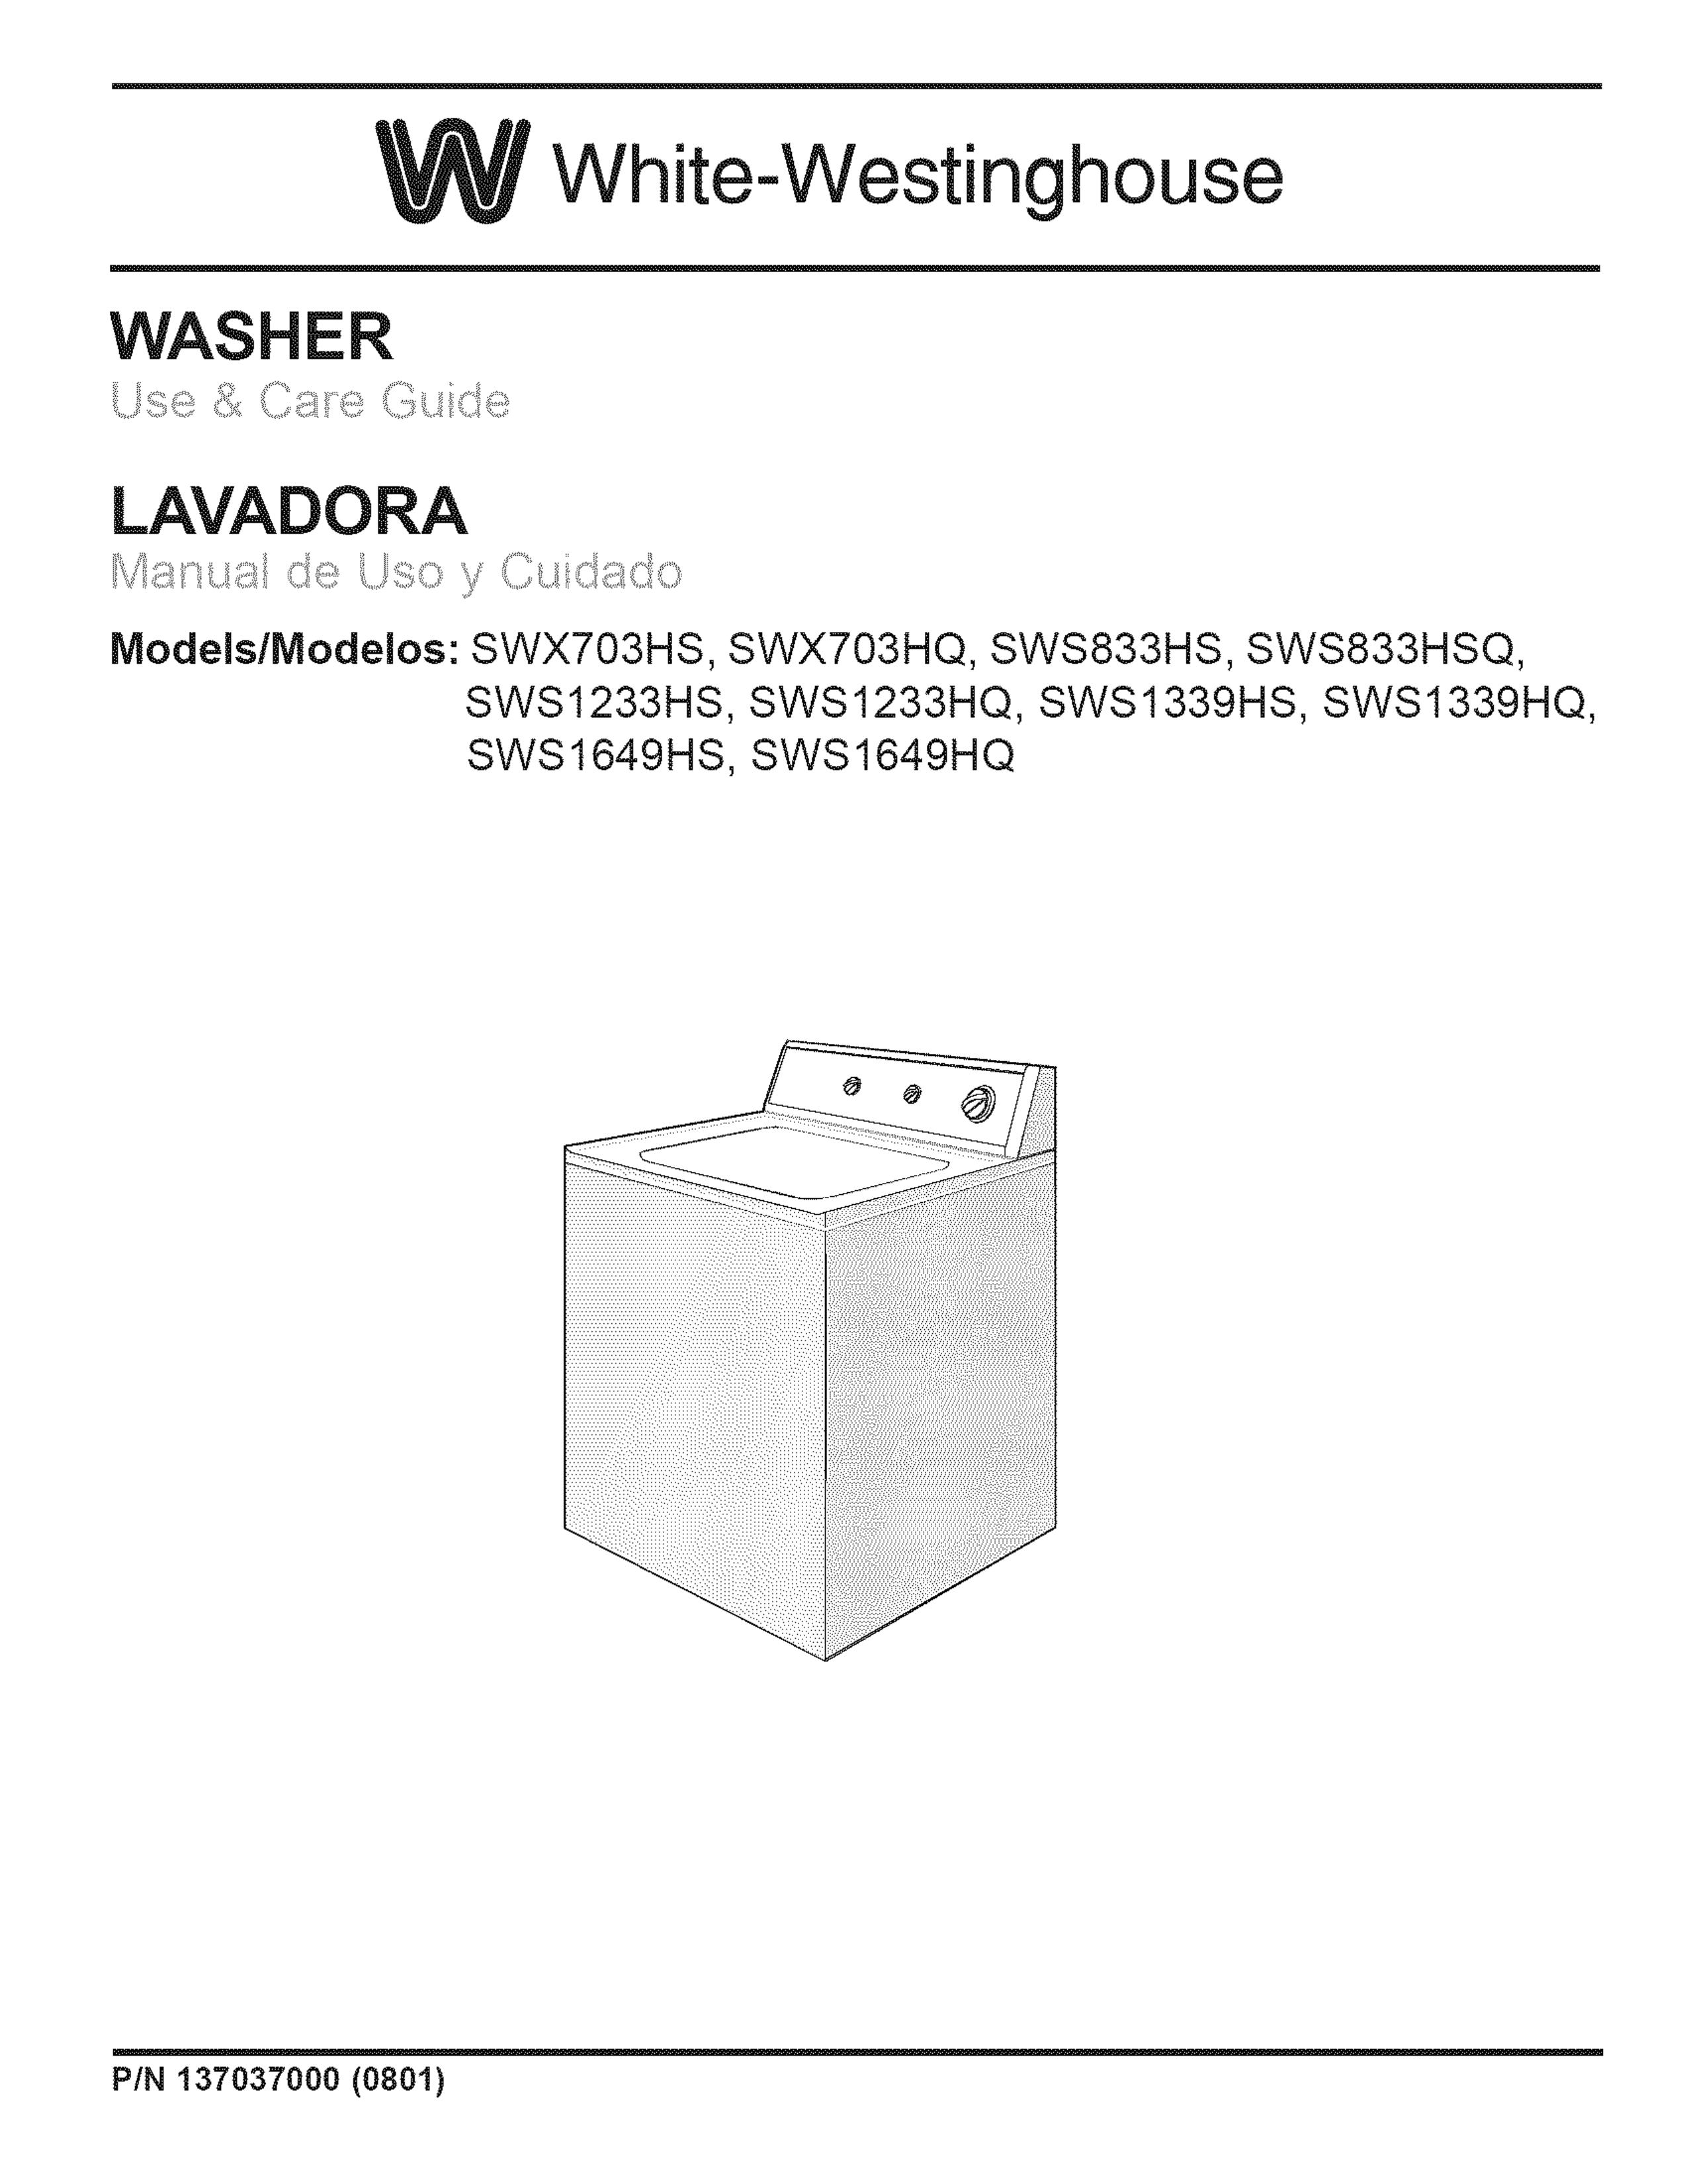 White-Westinghouse SWS1649HQ Washer User Manual